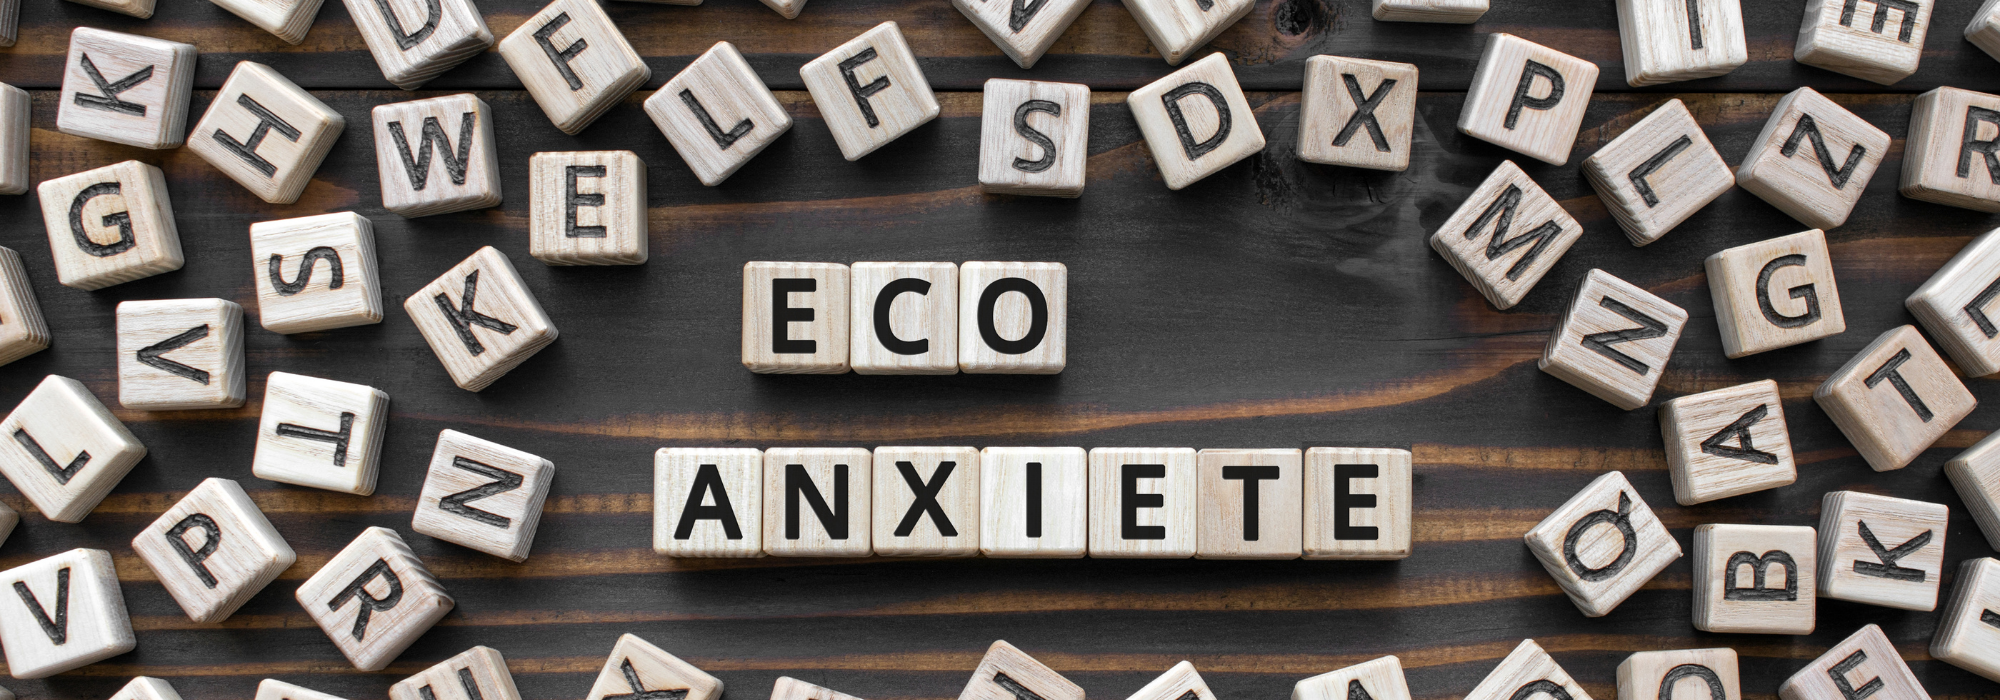 comment-gerer-eco-anxiete